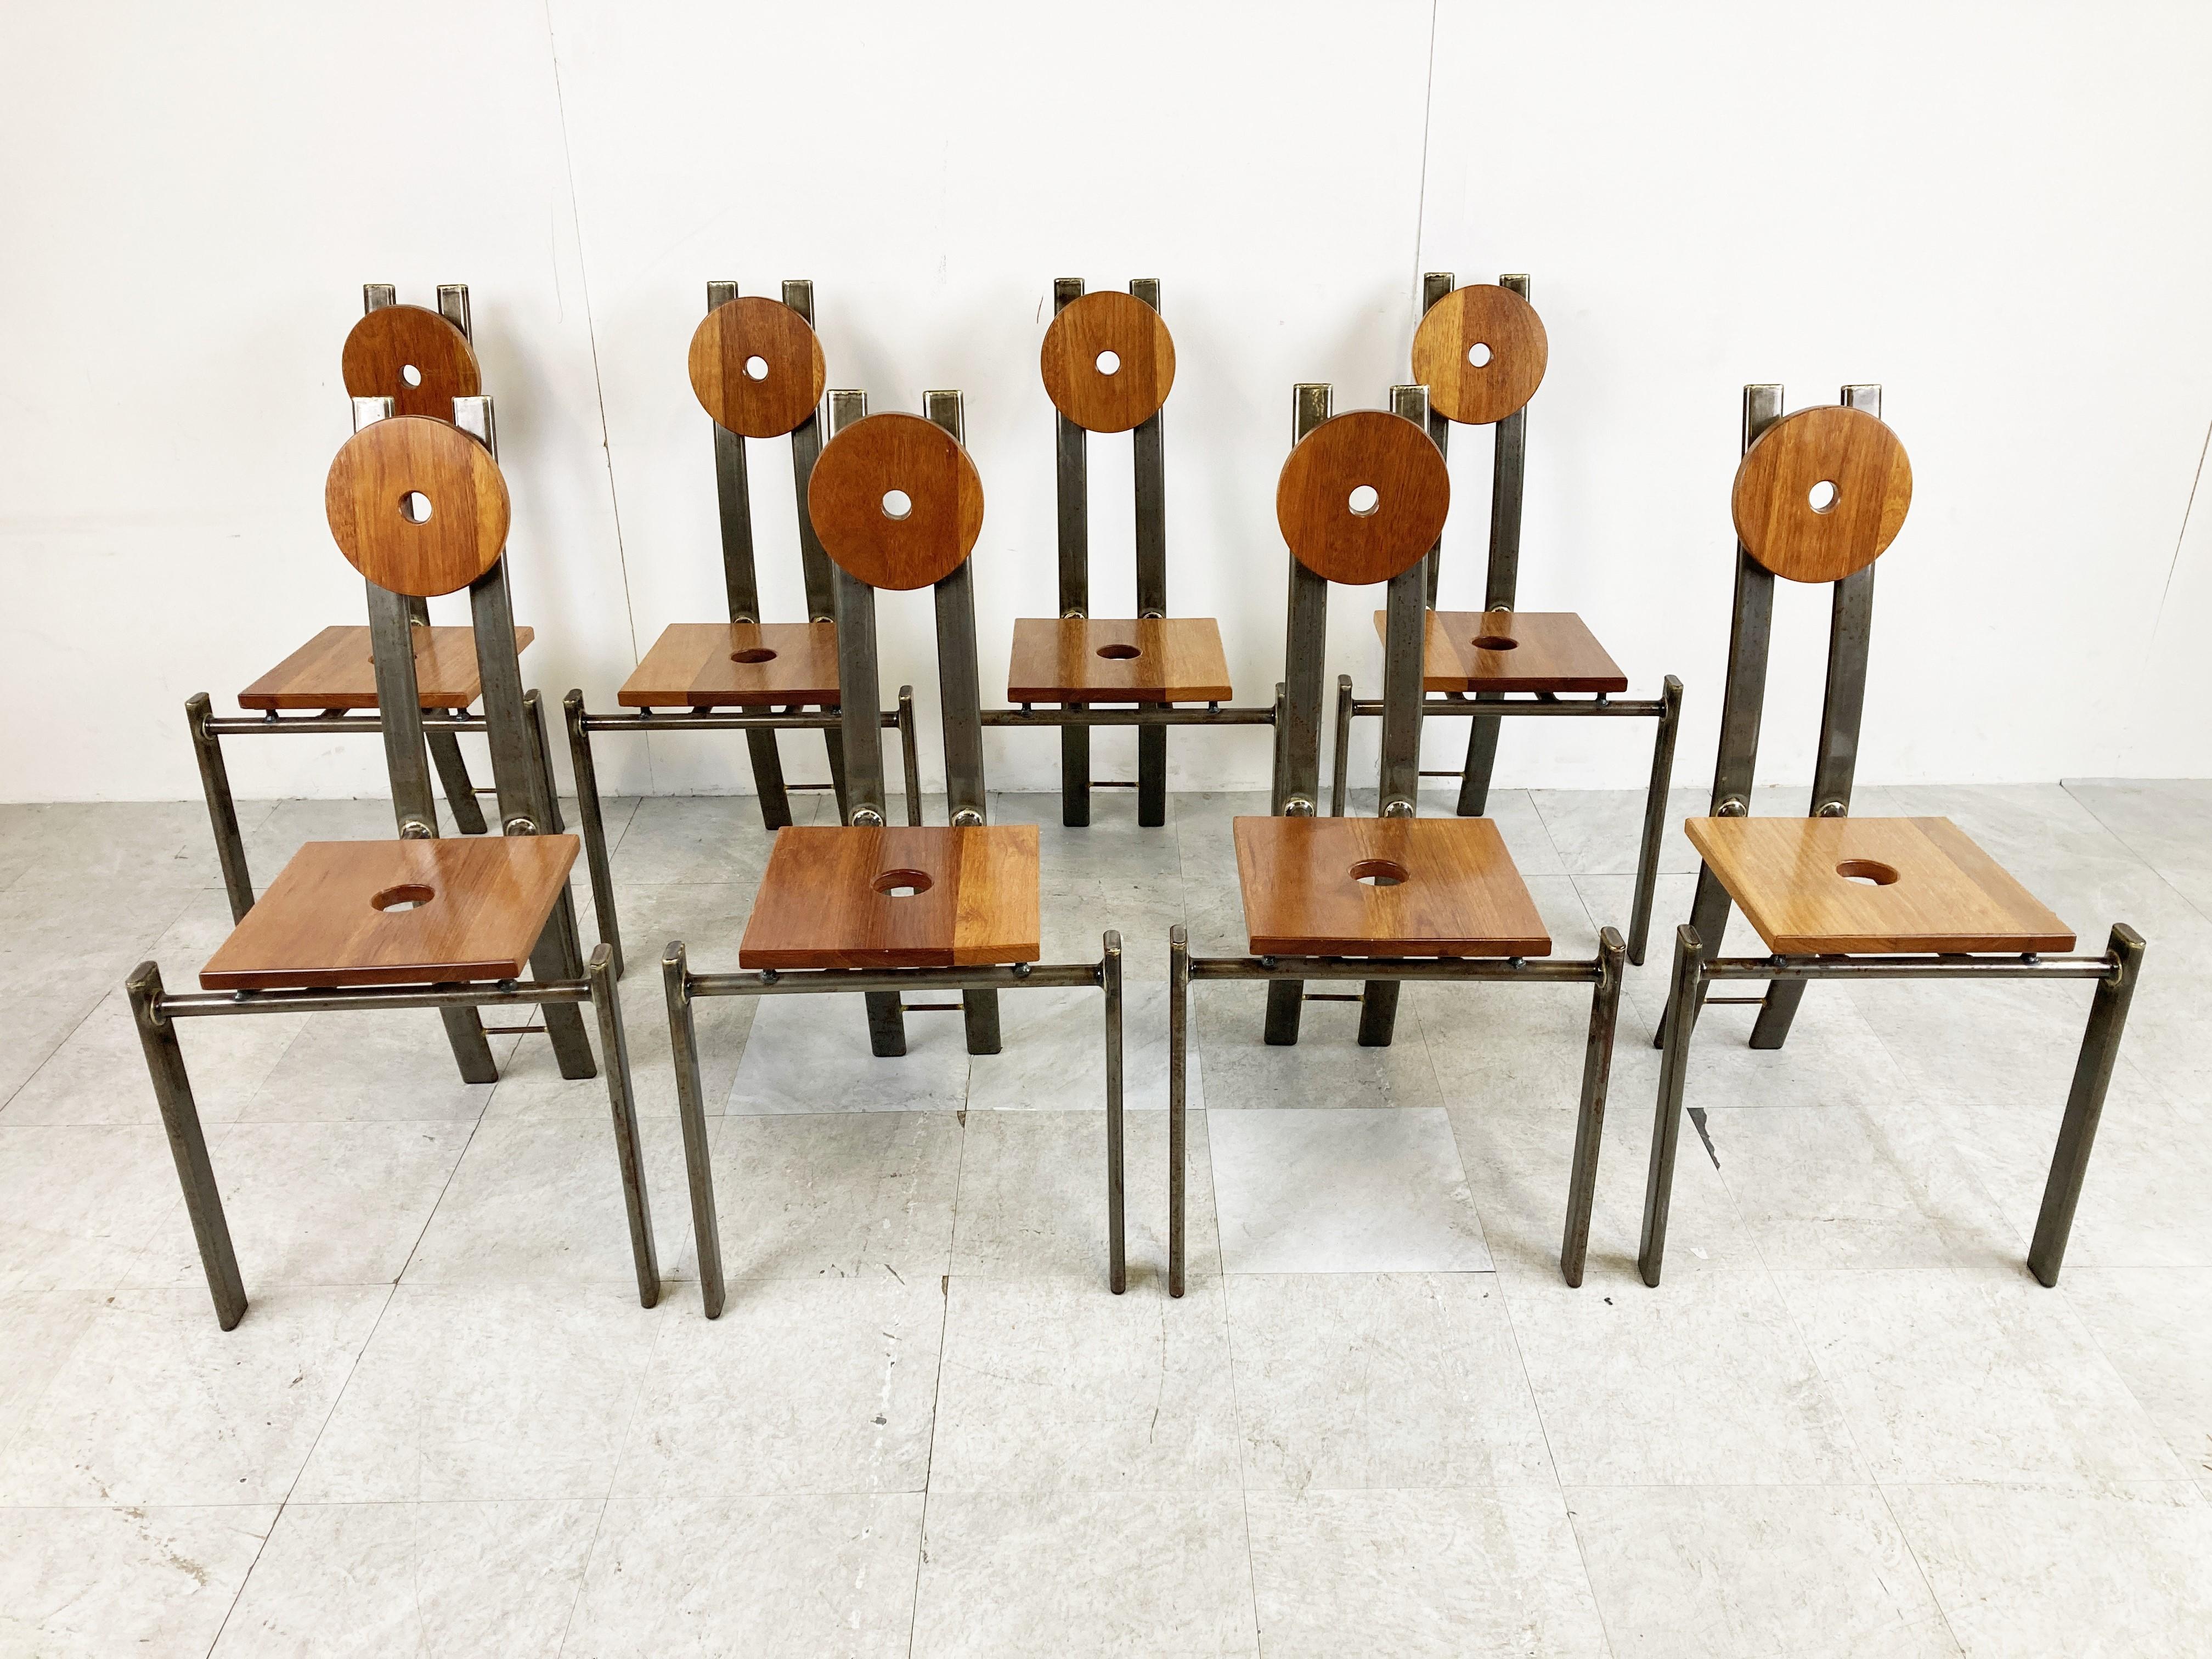 Set of 8 unique hand made brutalist dining chairs made from a metal frame with a square wooden seat and round wooden headrest.

You wont find a second set of these as they where custom made for a client in the seventies by local